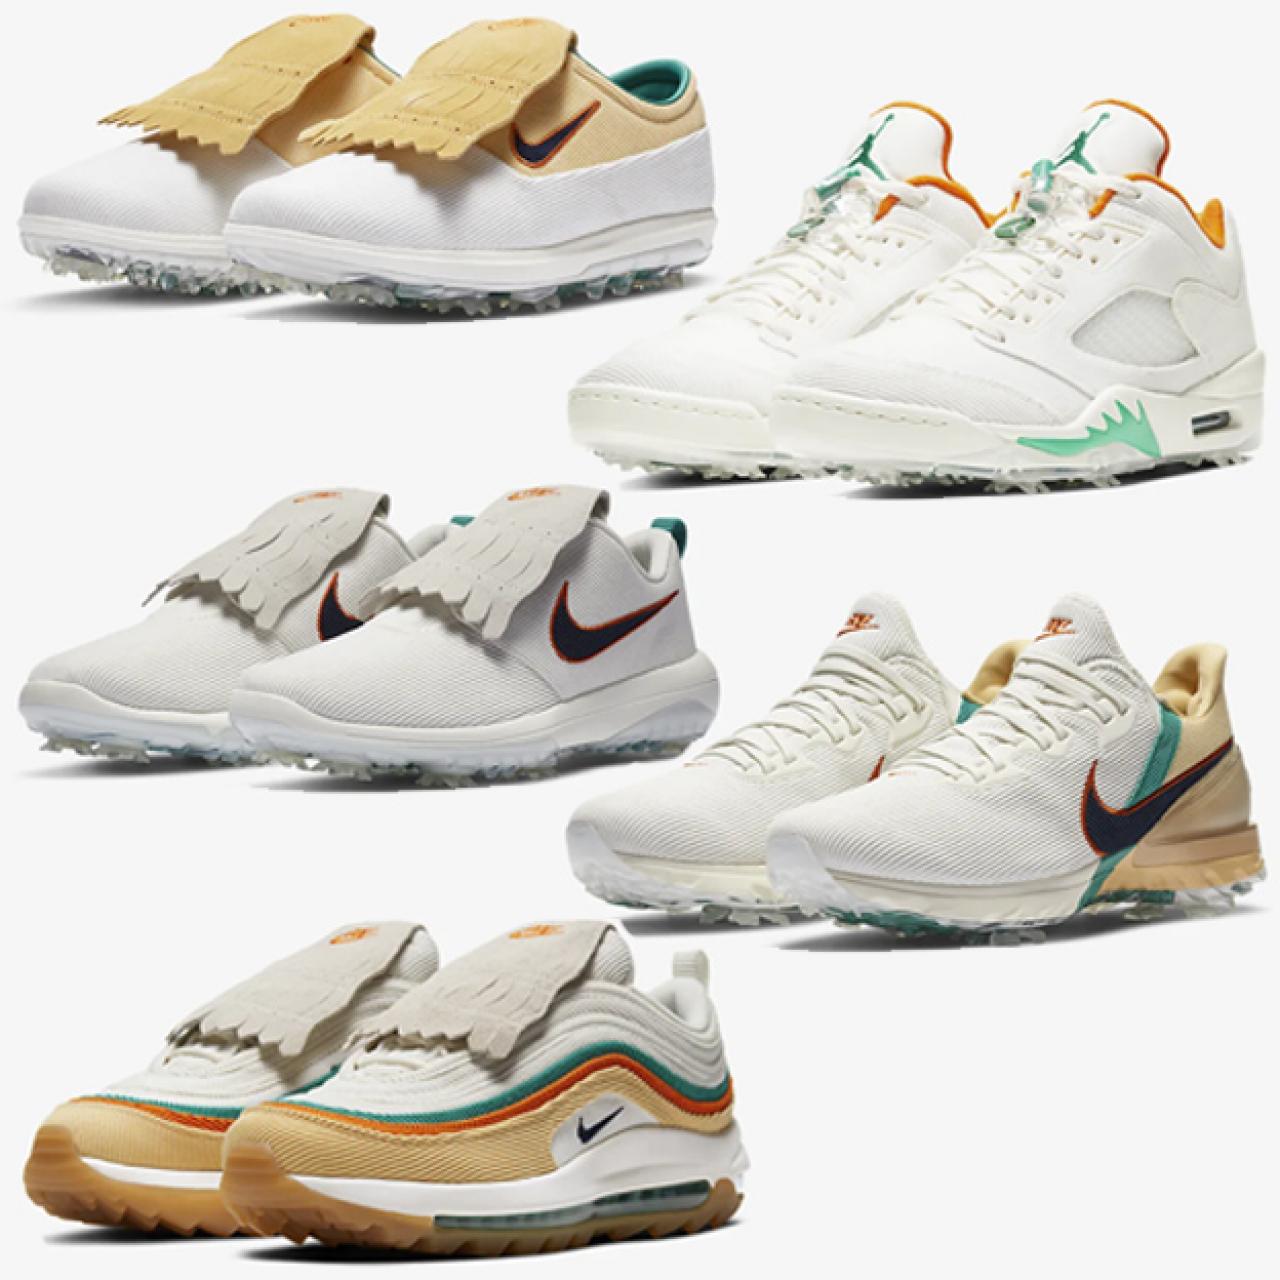 nike masters golf shoes 2020